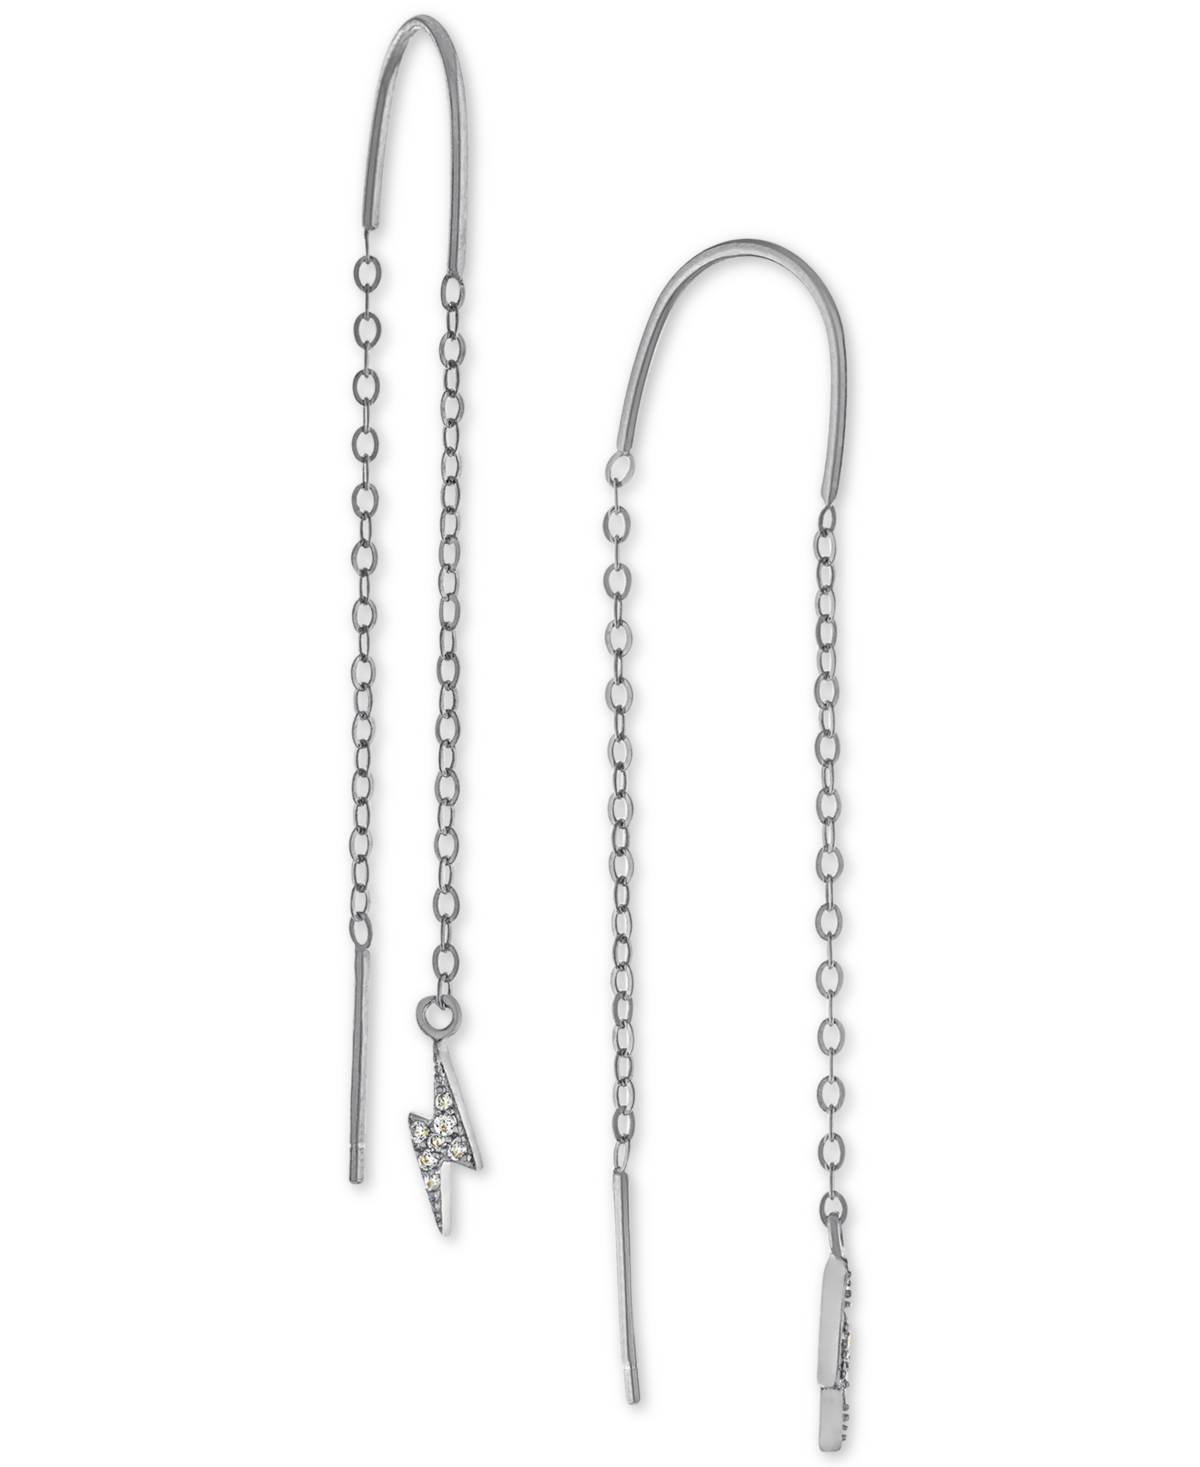 Cubic Zirconia Lightening Bolt Threader Earrings, Created for Macy's - Gold over Silver